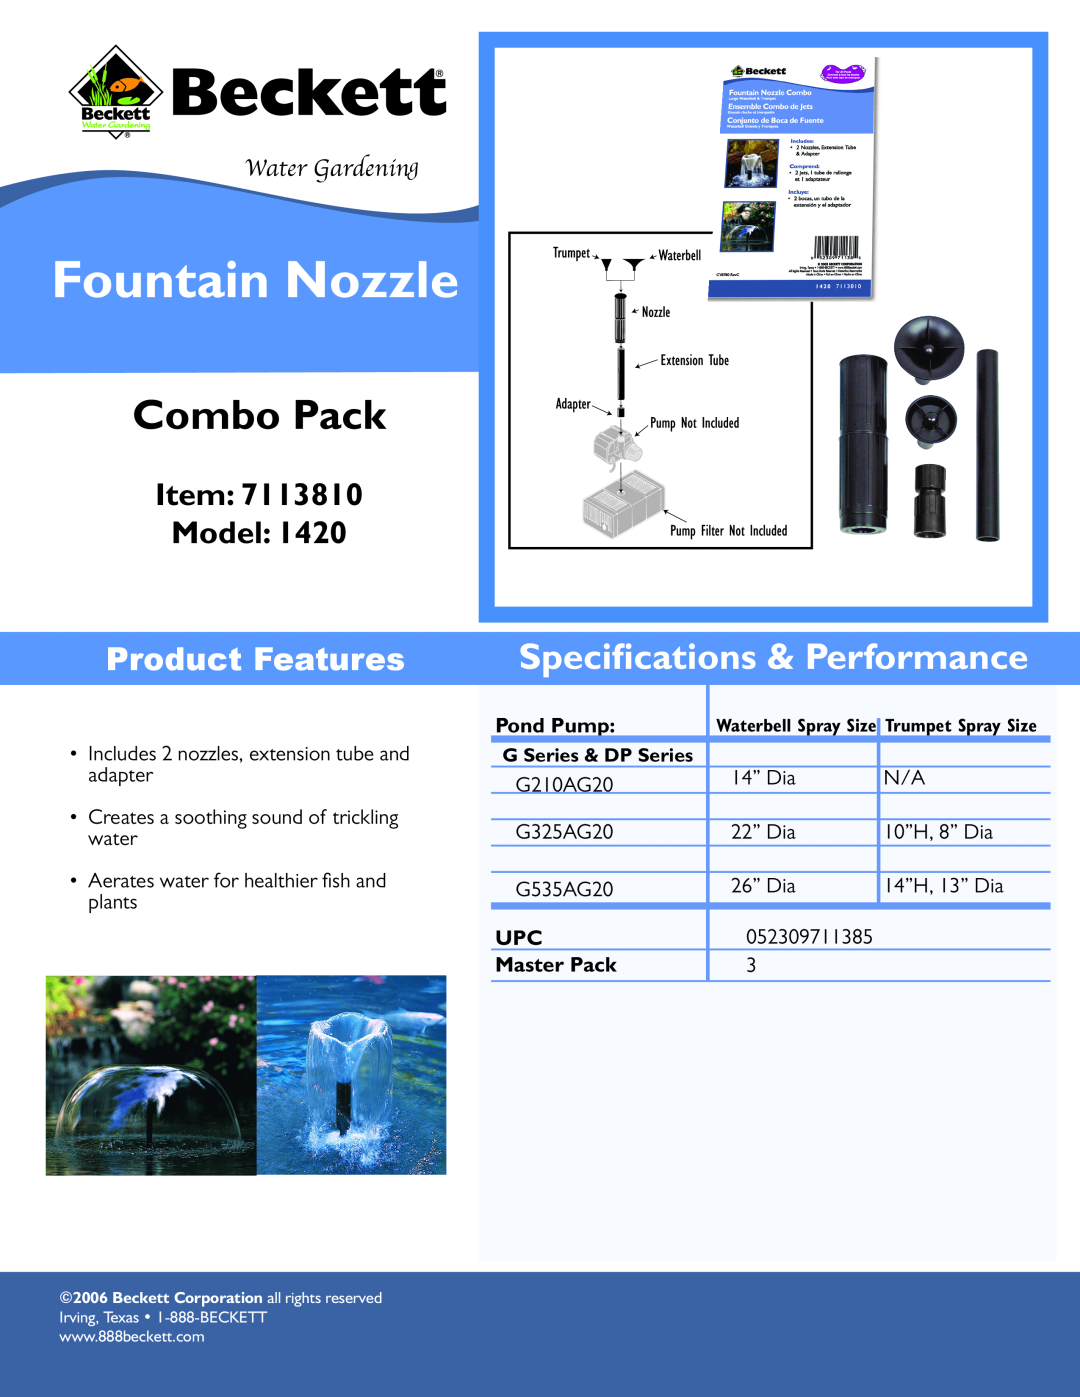 Beckett Water Gardening 1420 specifications Fountain Nozzle, Combo Pack, Speciﬁcations & Performance, Item Model 